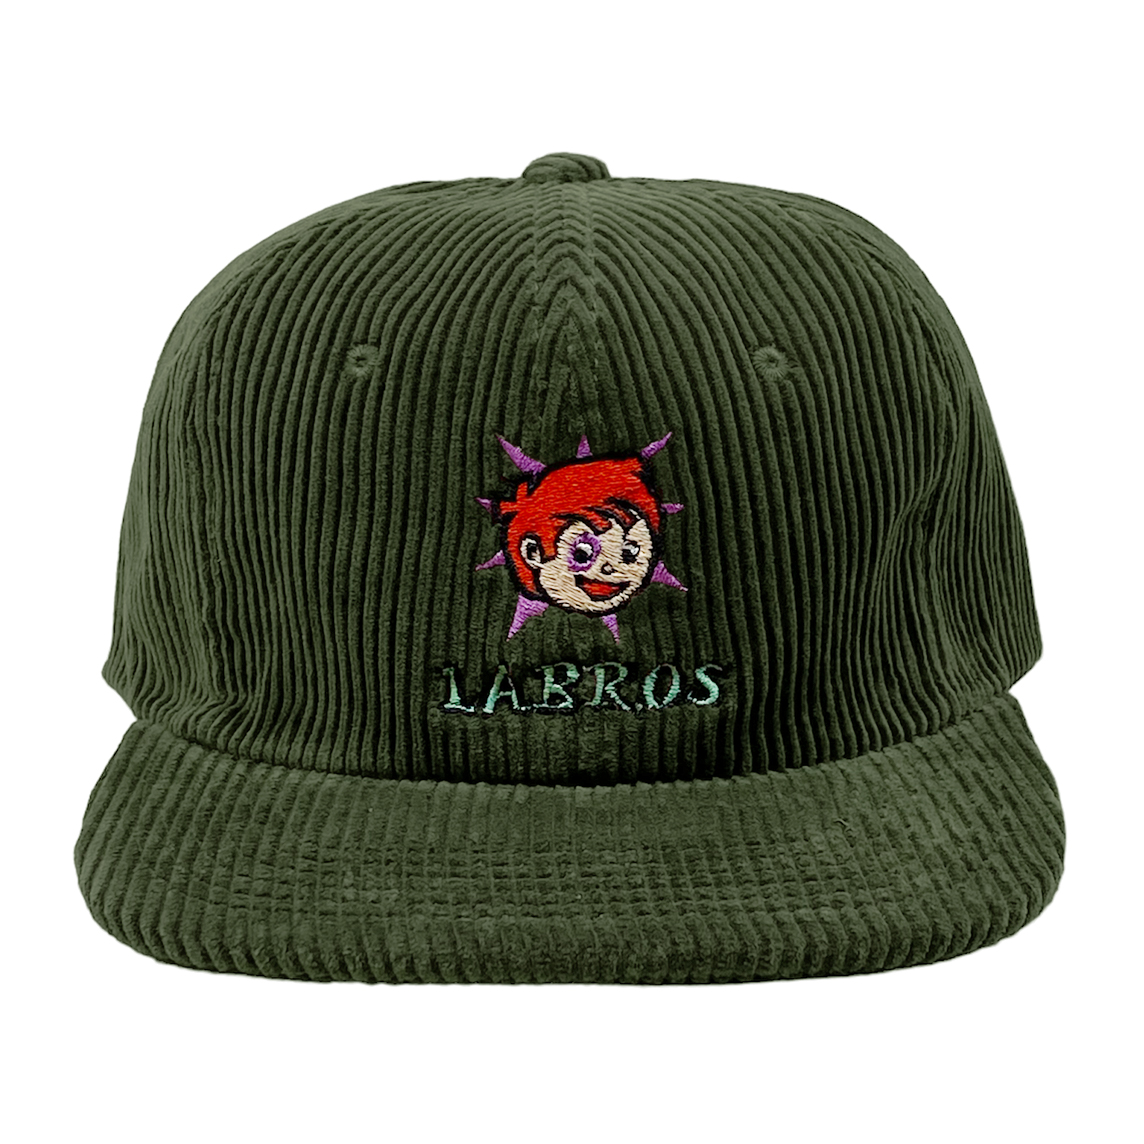 Punched Man Corduroy 6-panel Cap (Olive)